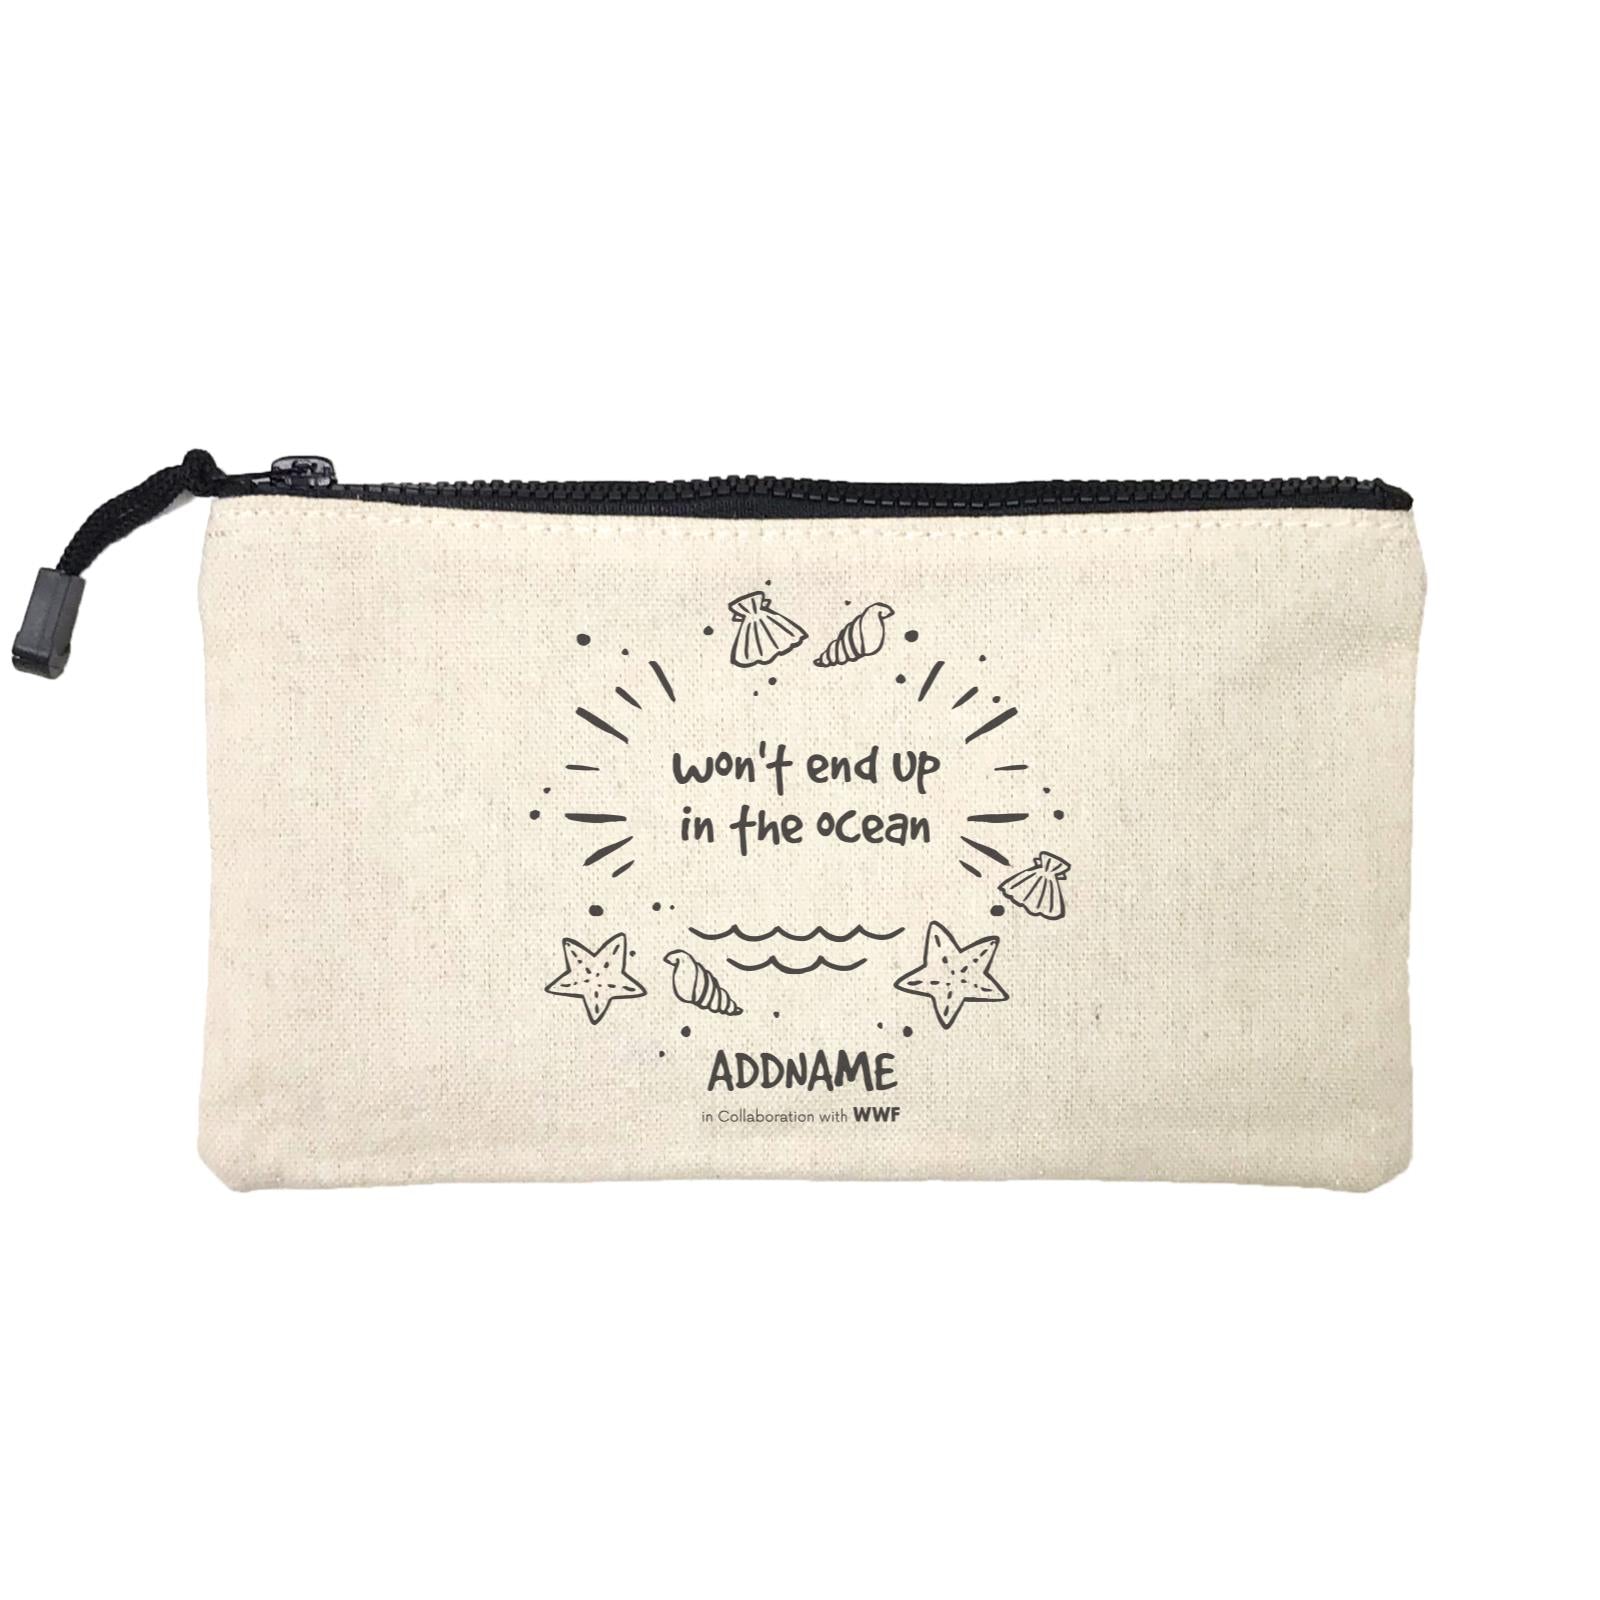 Wont End Up In The Ocean Doodle Addname Mini Accessories Stationery Pouch